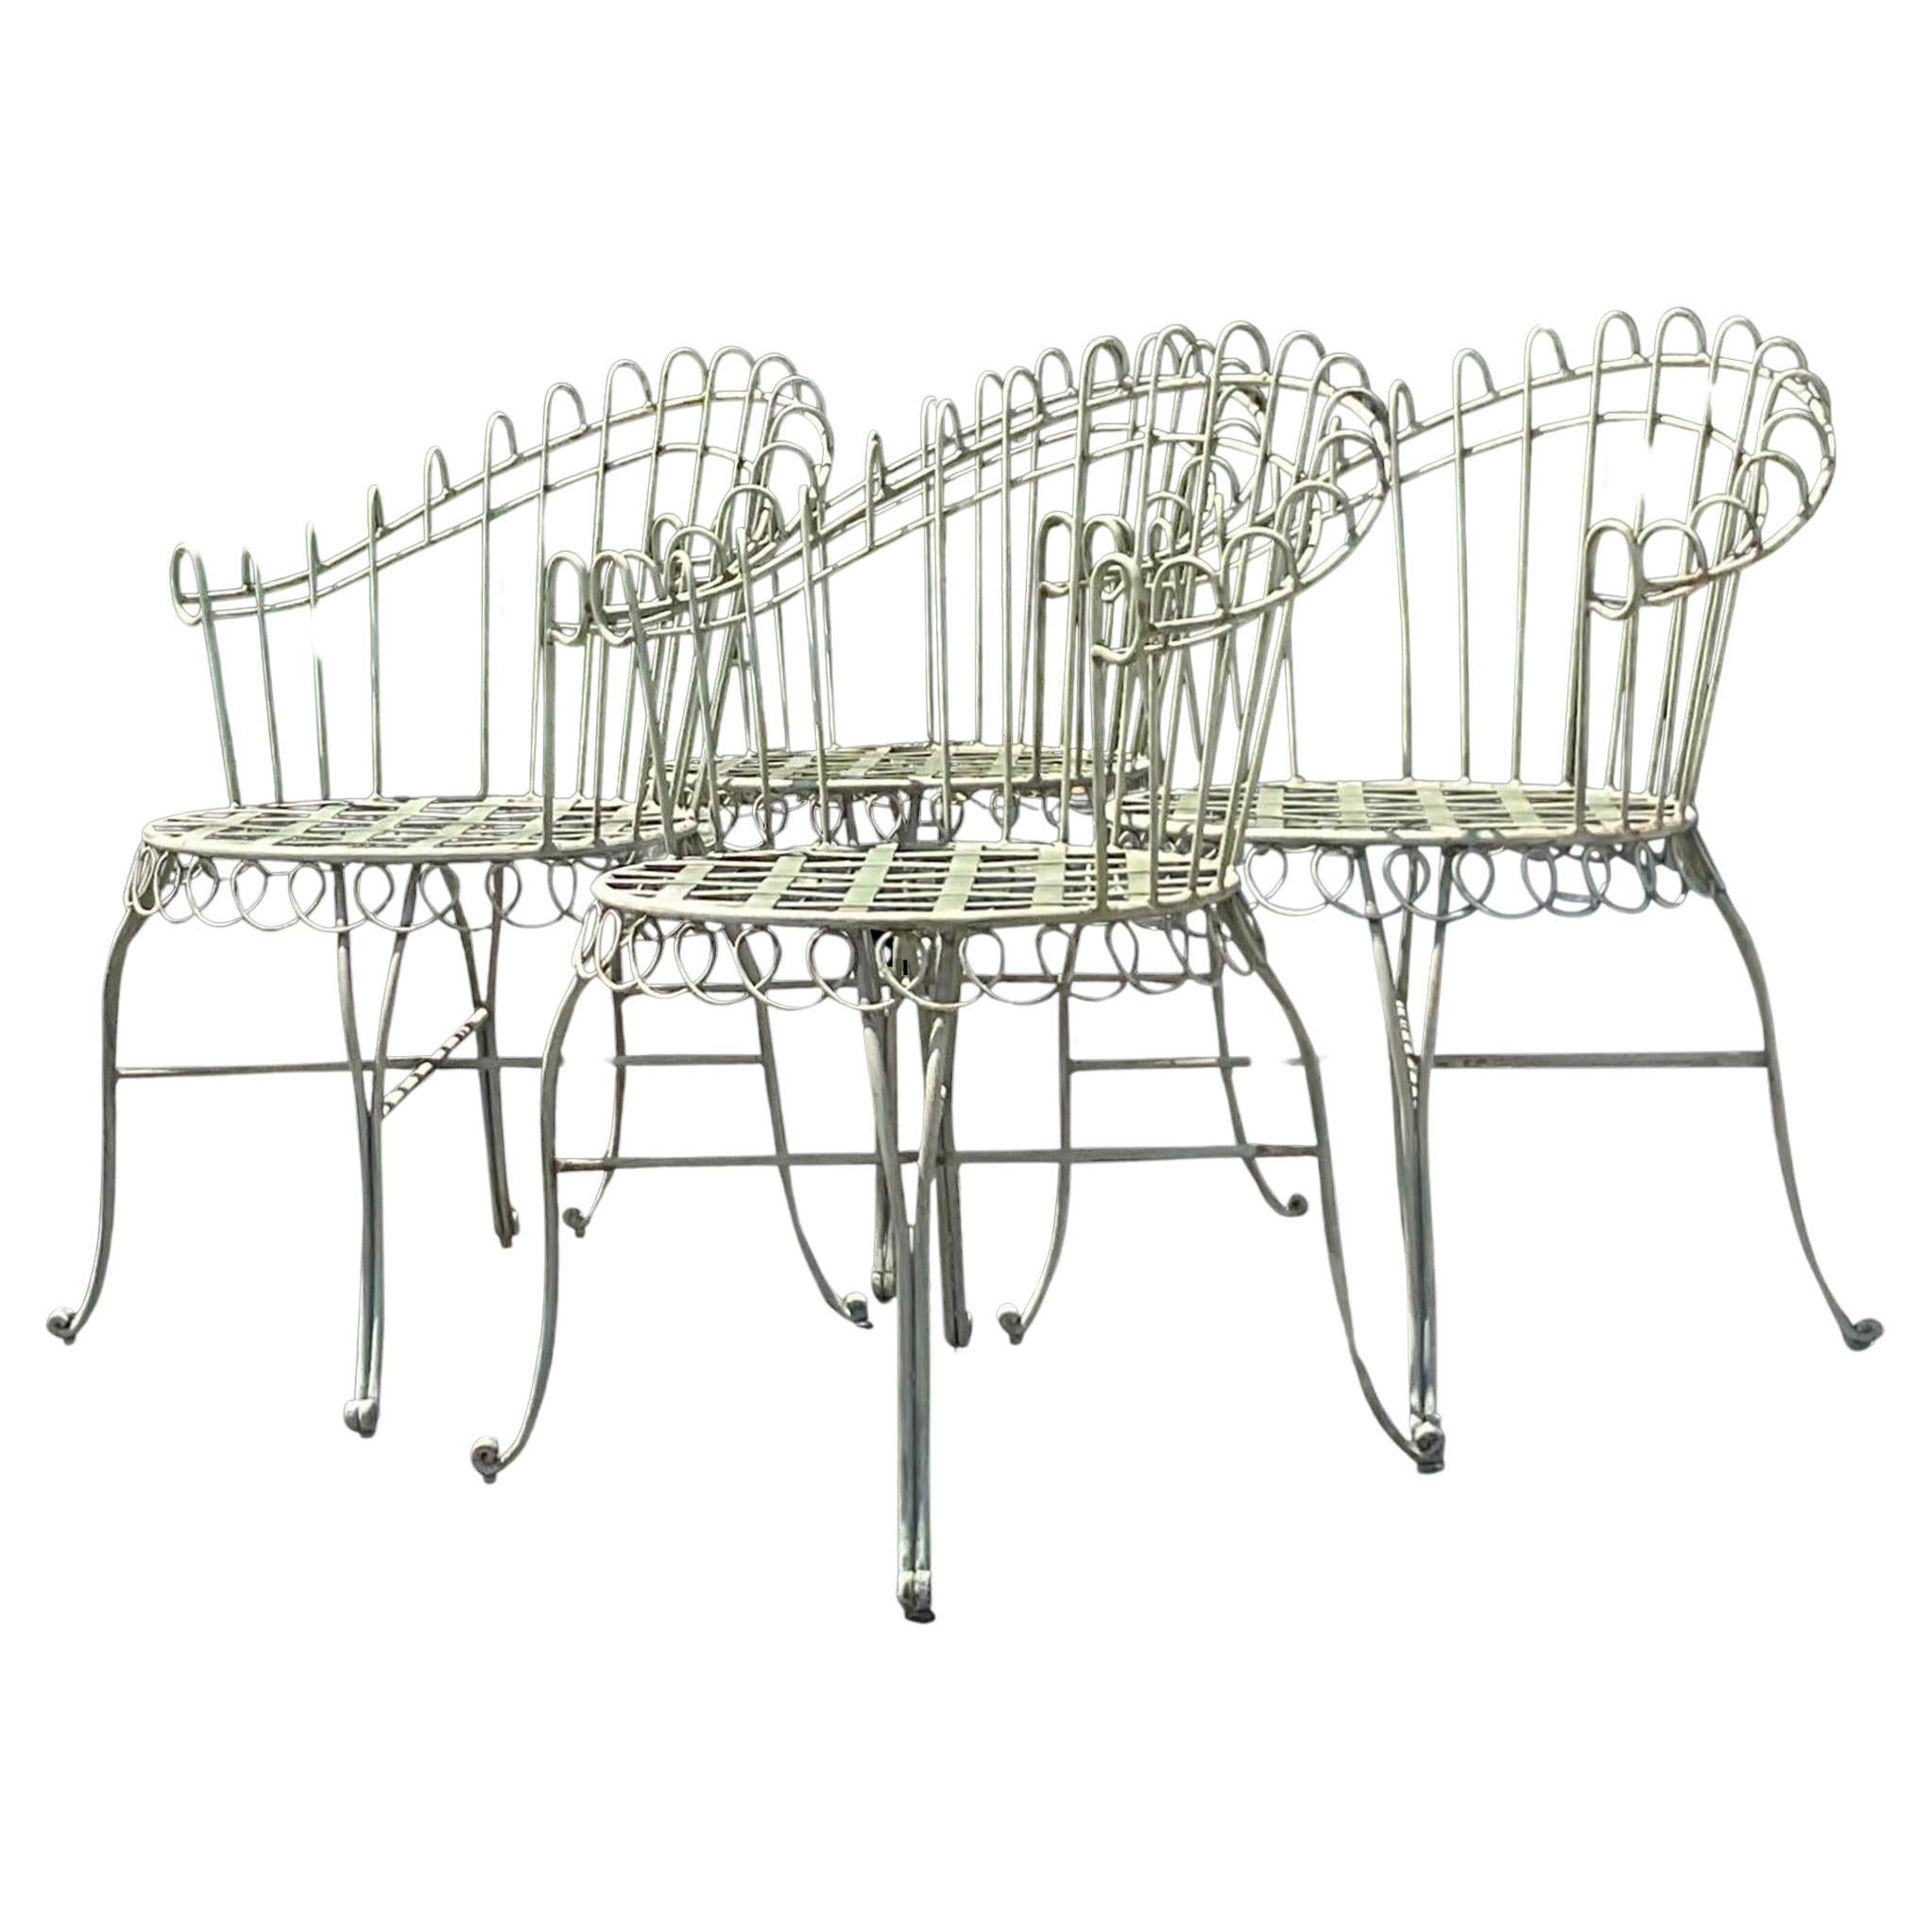 Vintage Coastal Scroll Wrought Iron Dining Chairs - Set of 4 For Sale